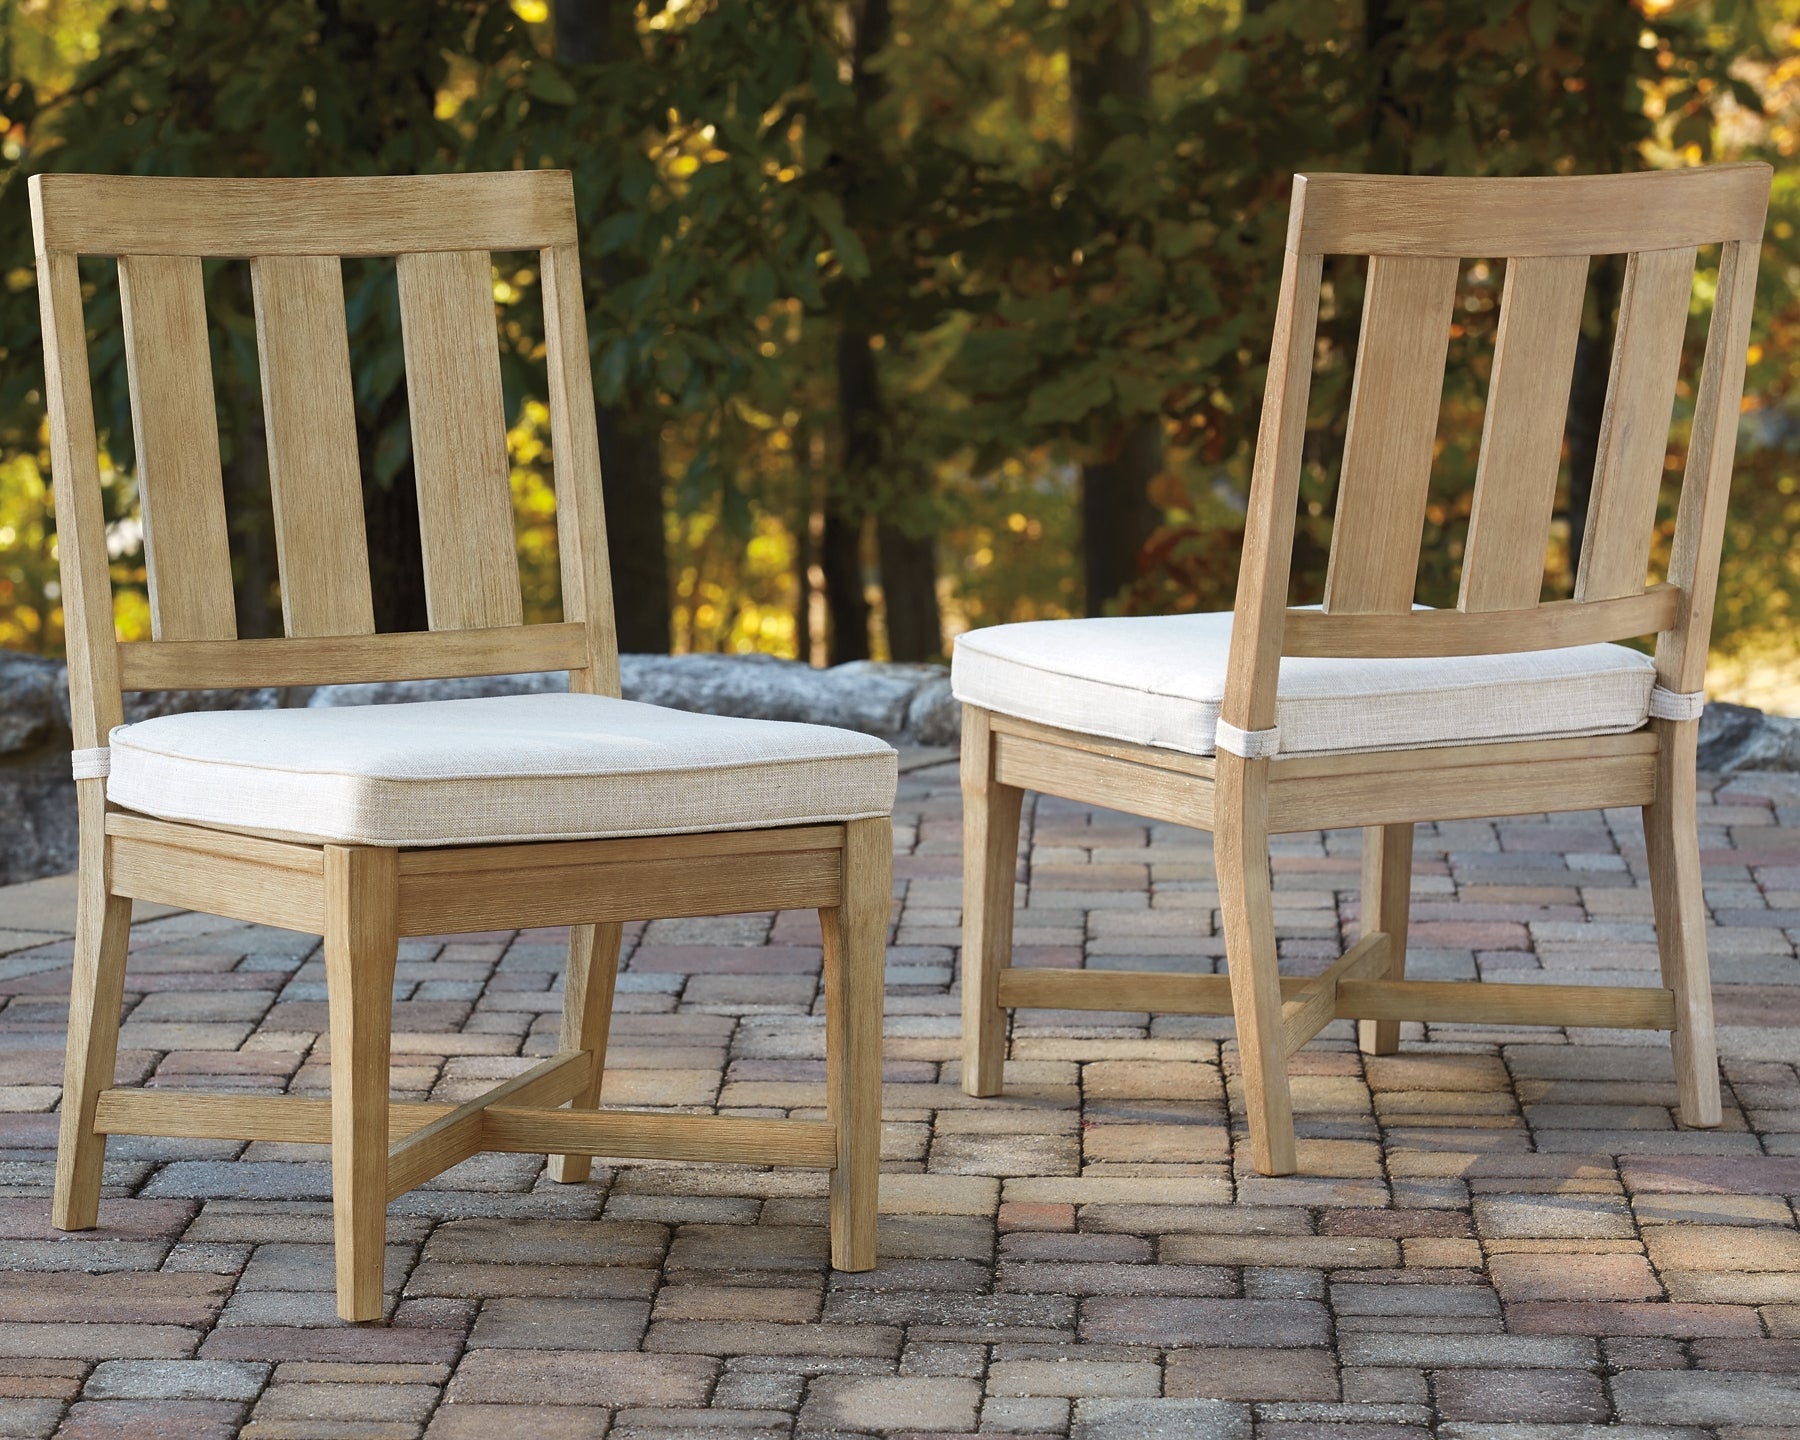 Clare View Outdoor Dining Table and 4 Chairs